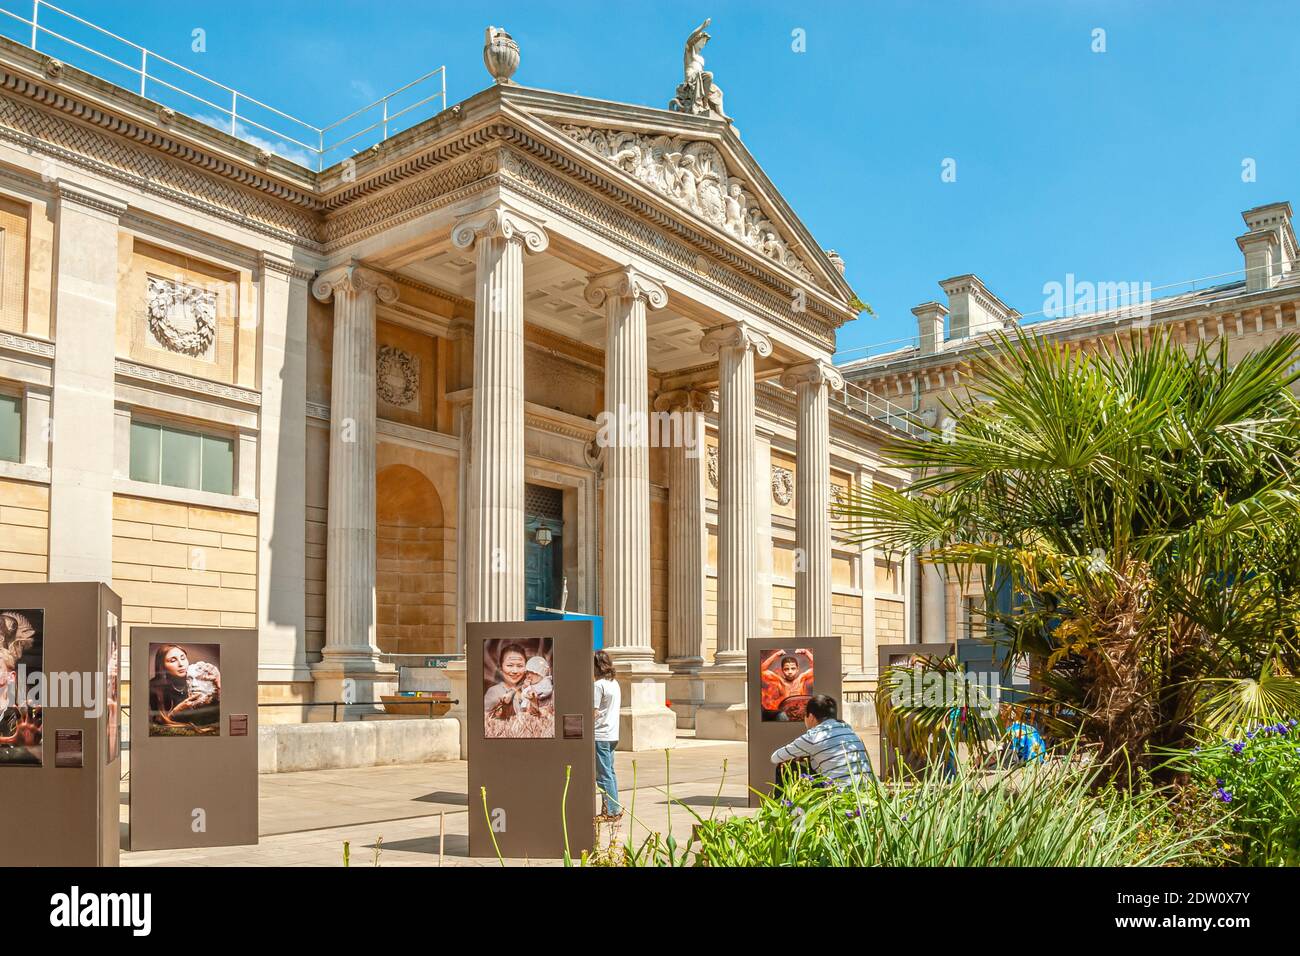 Ashmolean Museum of Art and Archaeology in Oxford, Oxfordshire, Angleterre Banque D'Images